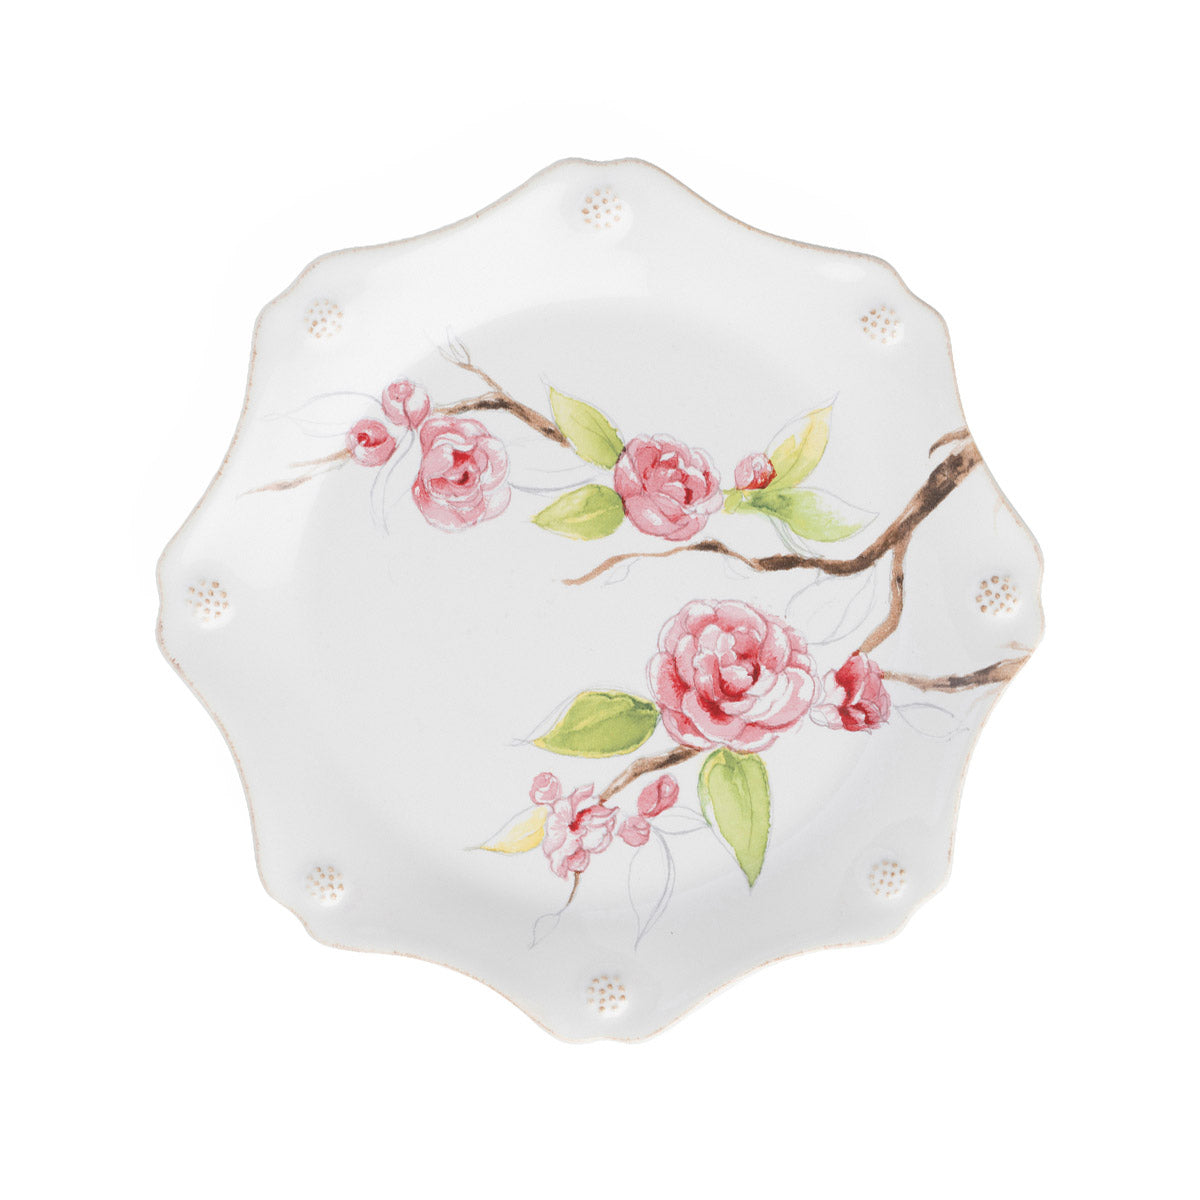 Complete with a thread and berries design, this sweetly scalloped Camellia flower dessert and salad plate adds a burst of pink to the table.